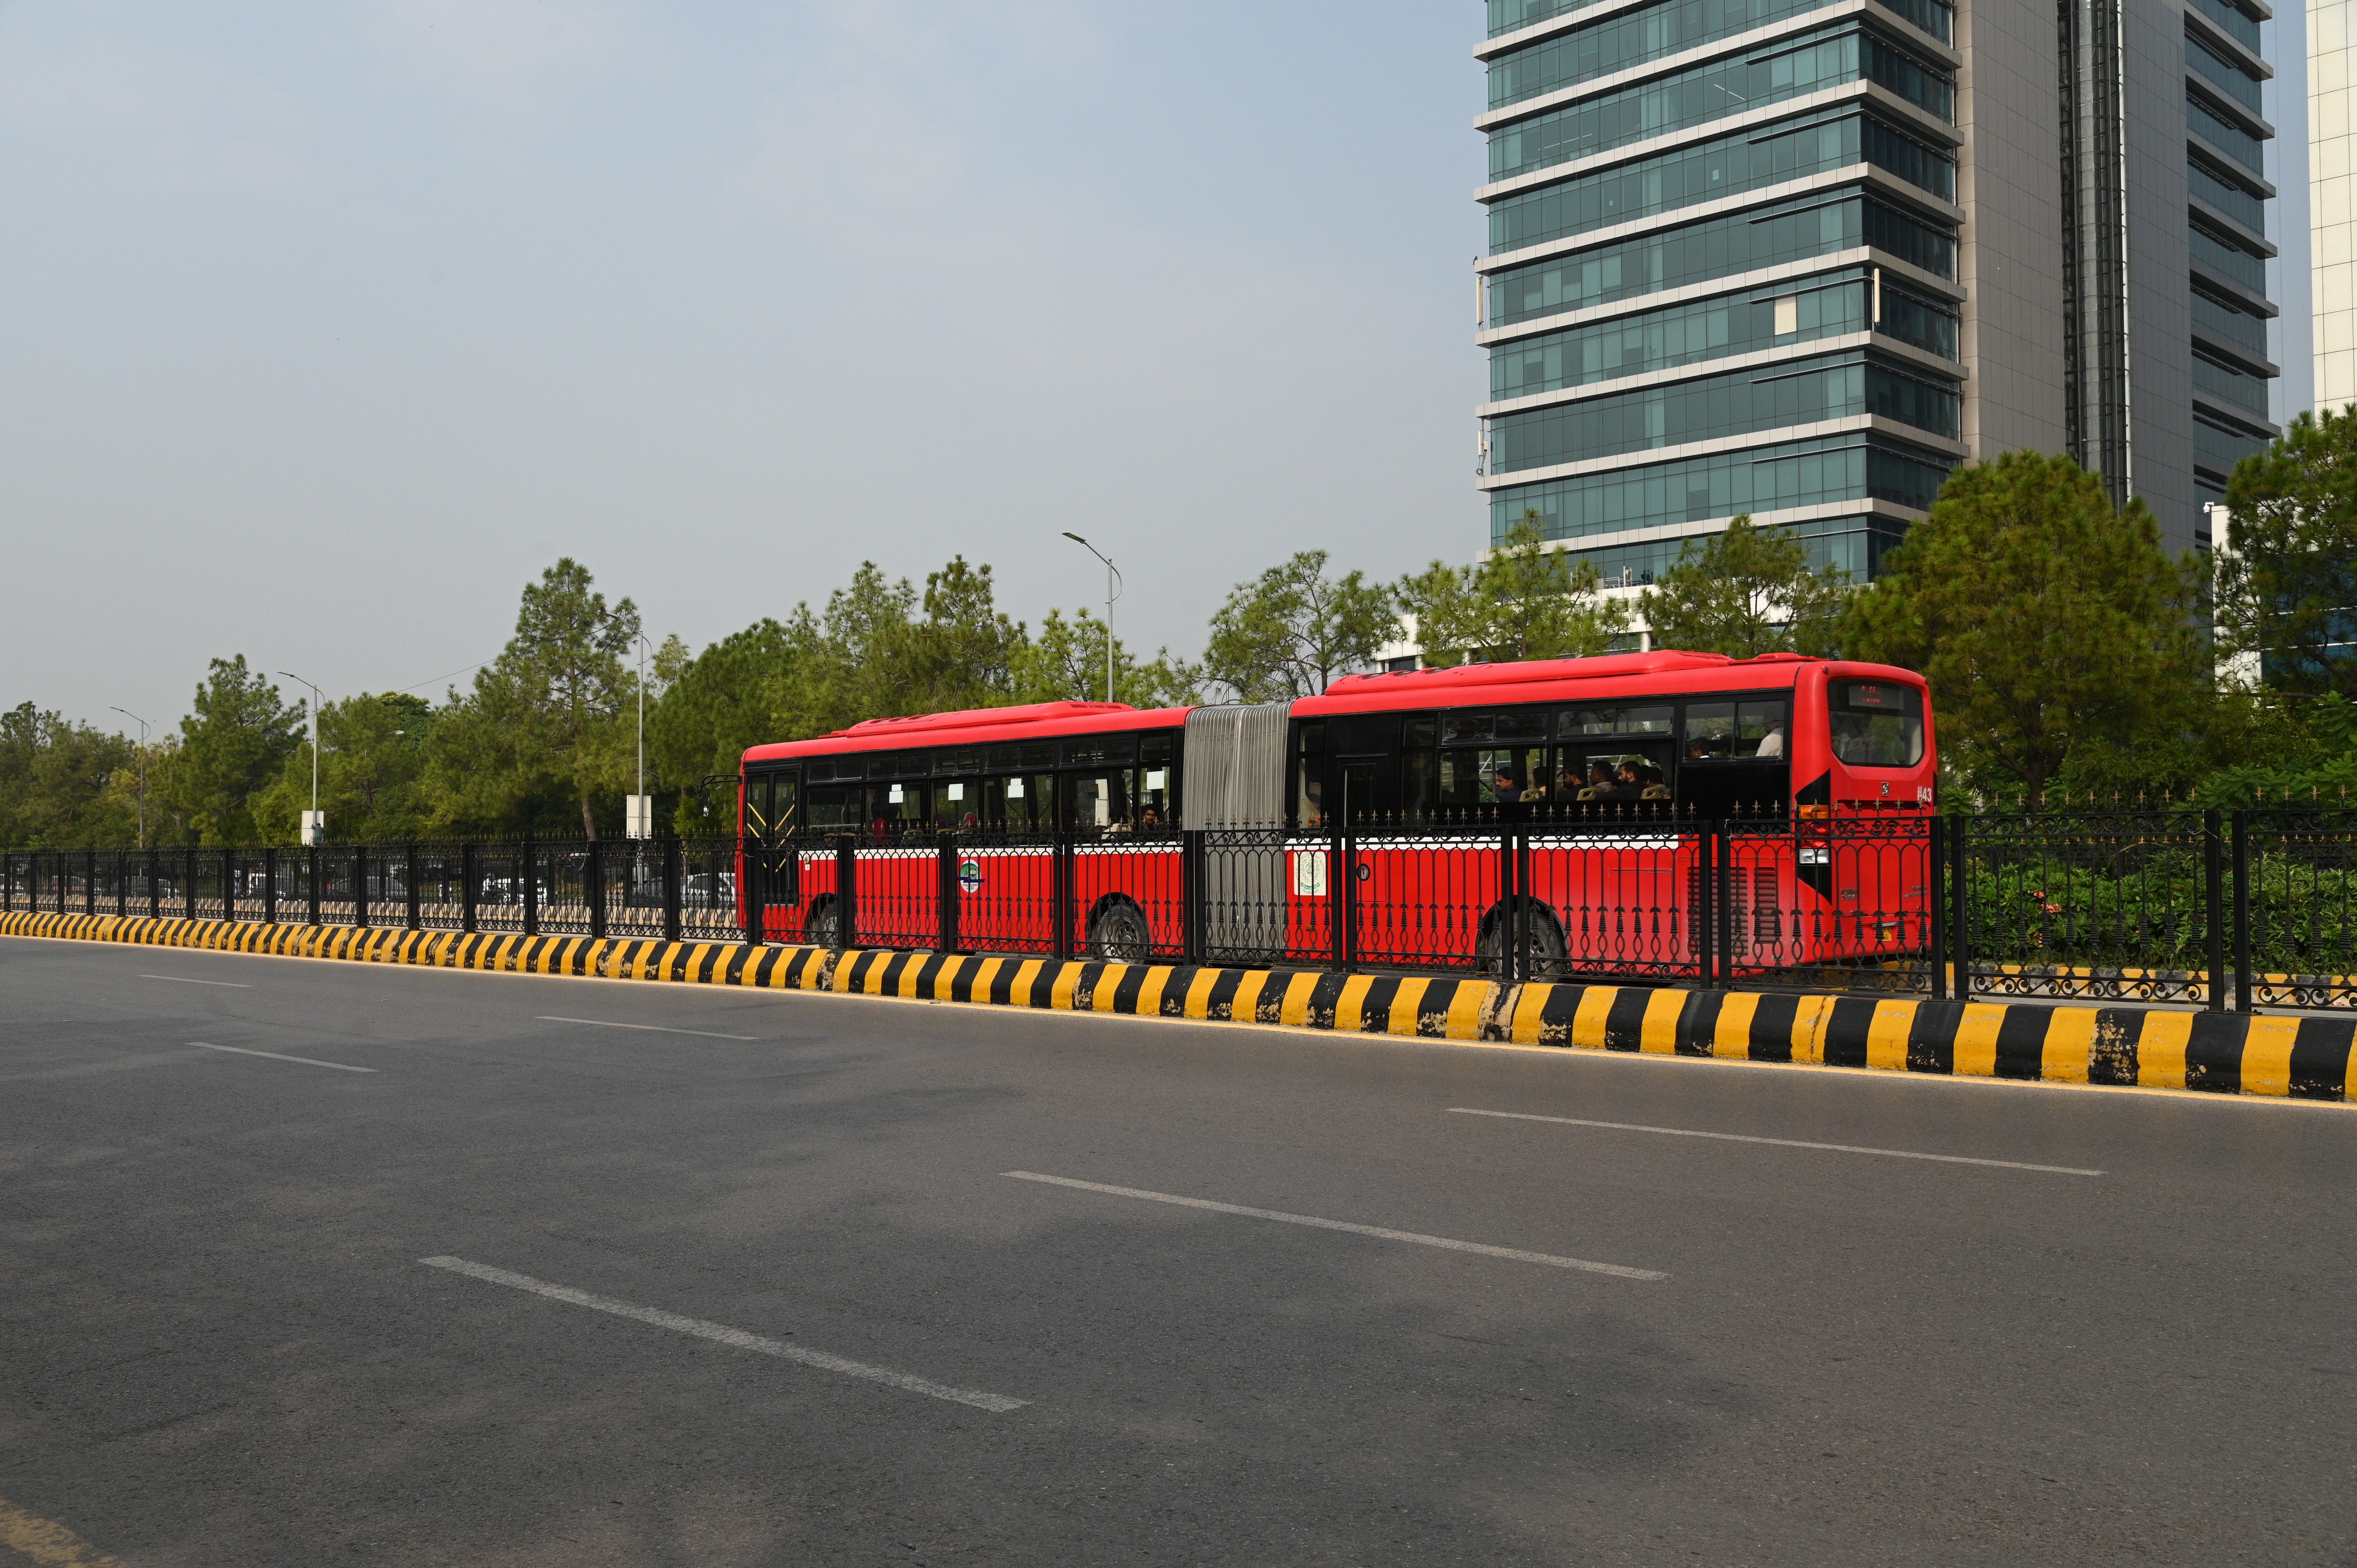 A metro bus passing by the blue area metro bus track